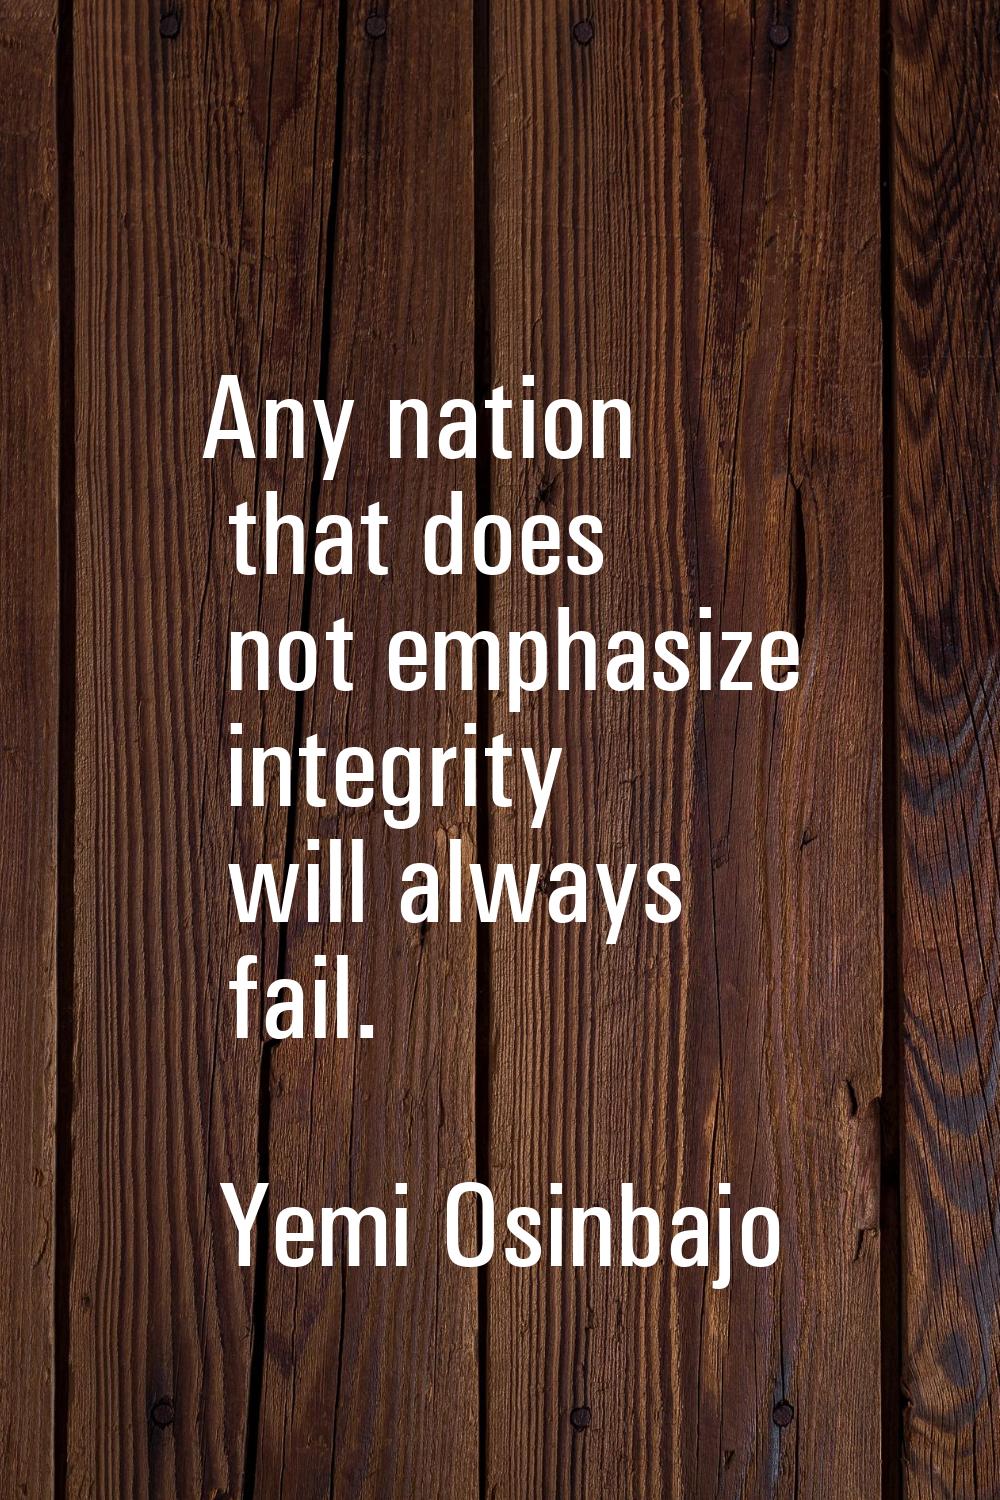 Any nation that does not emphasize integrity will always fail.